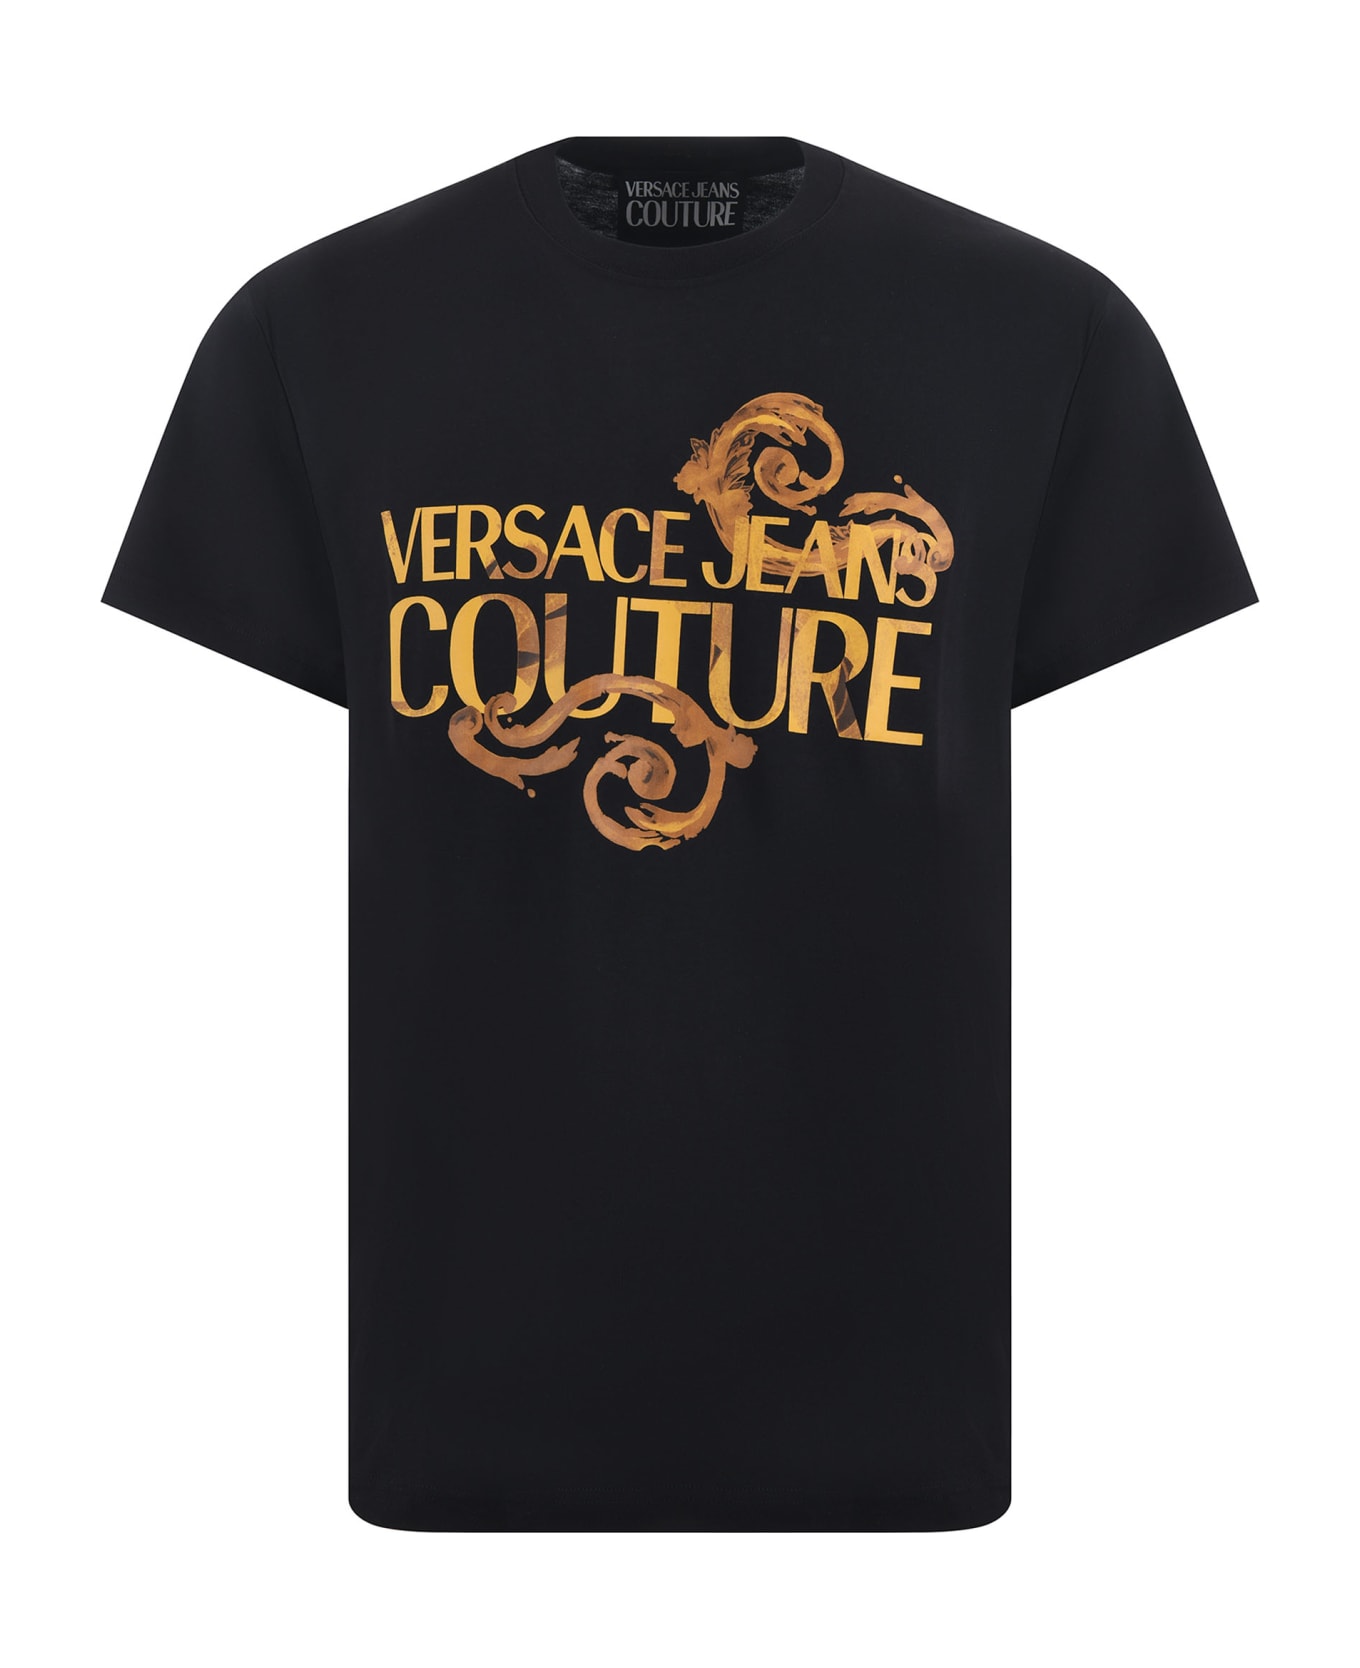 Versace Jeans Couture Logo-printed Crewneck T-shirt Versace Jeans Couture - Nero/oro